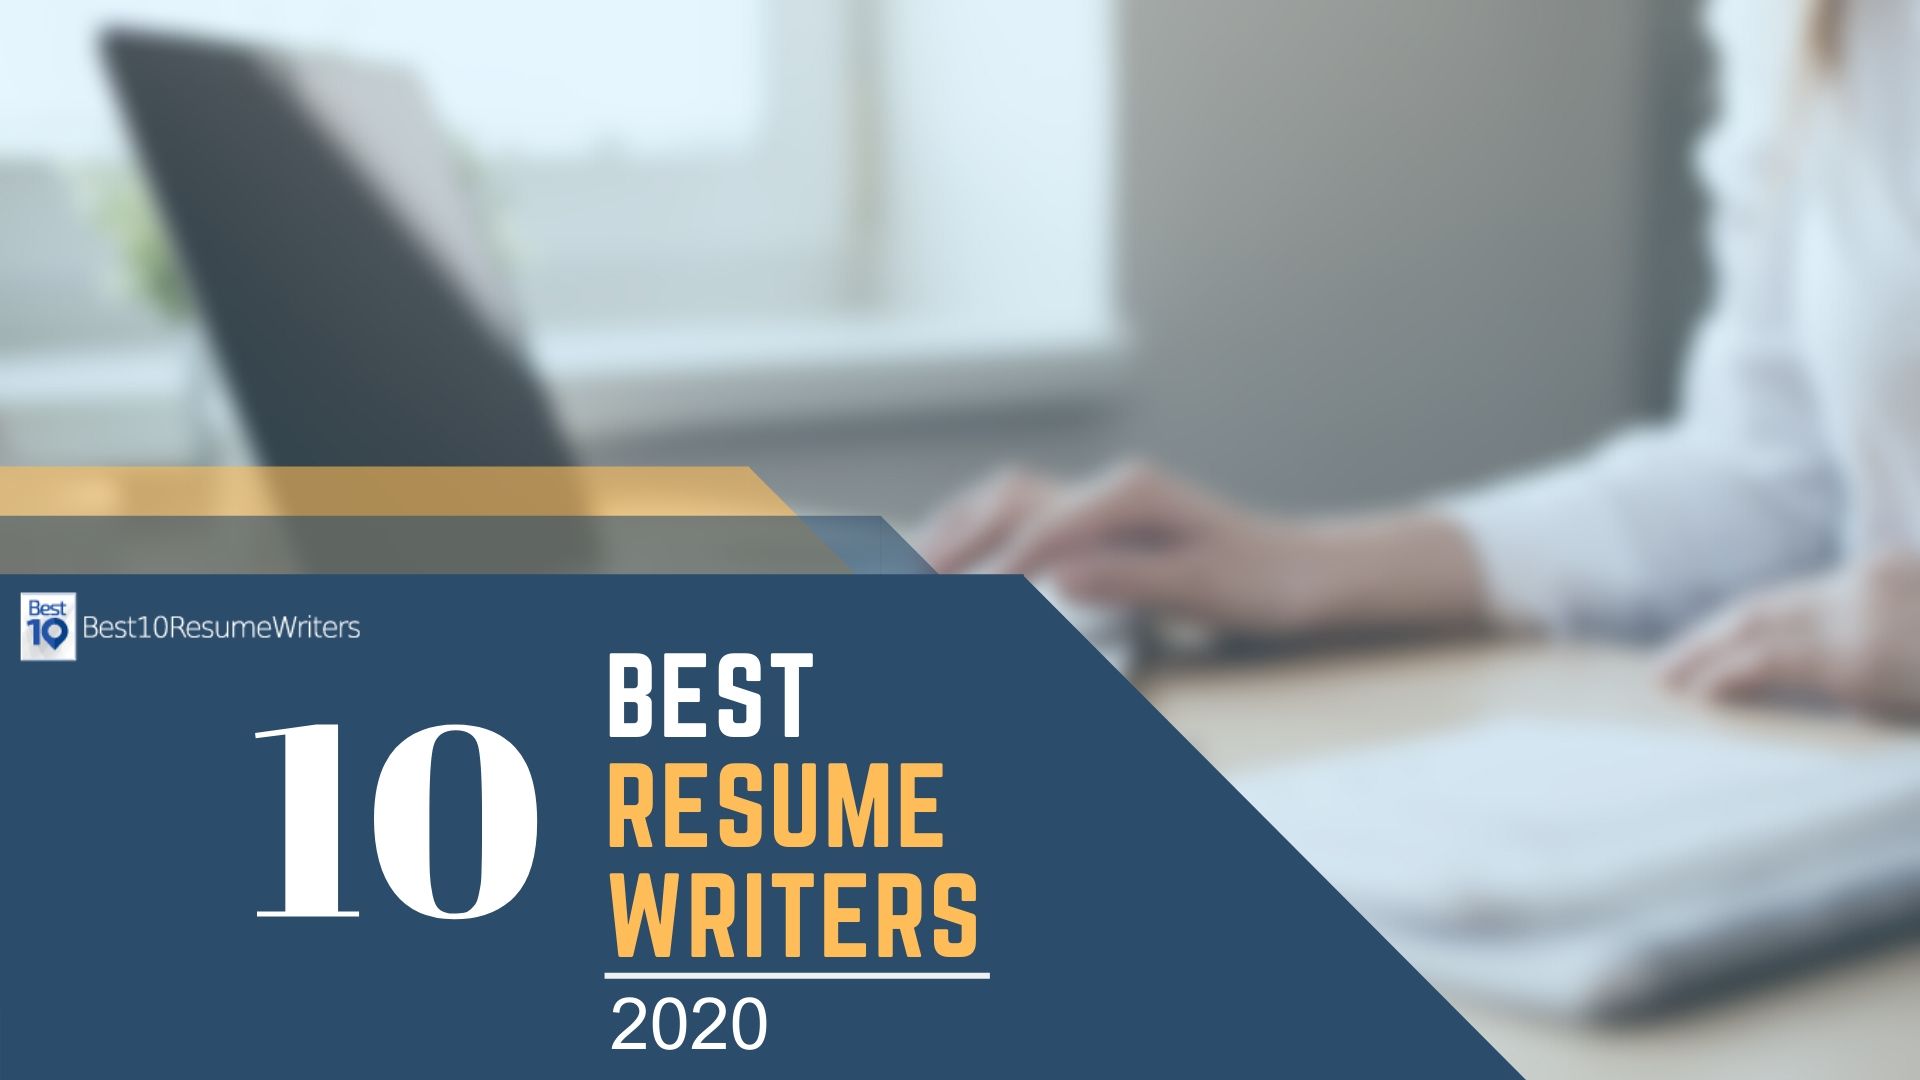 Best Resume Writers in the United States: 2020 Edition